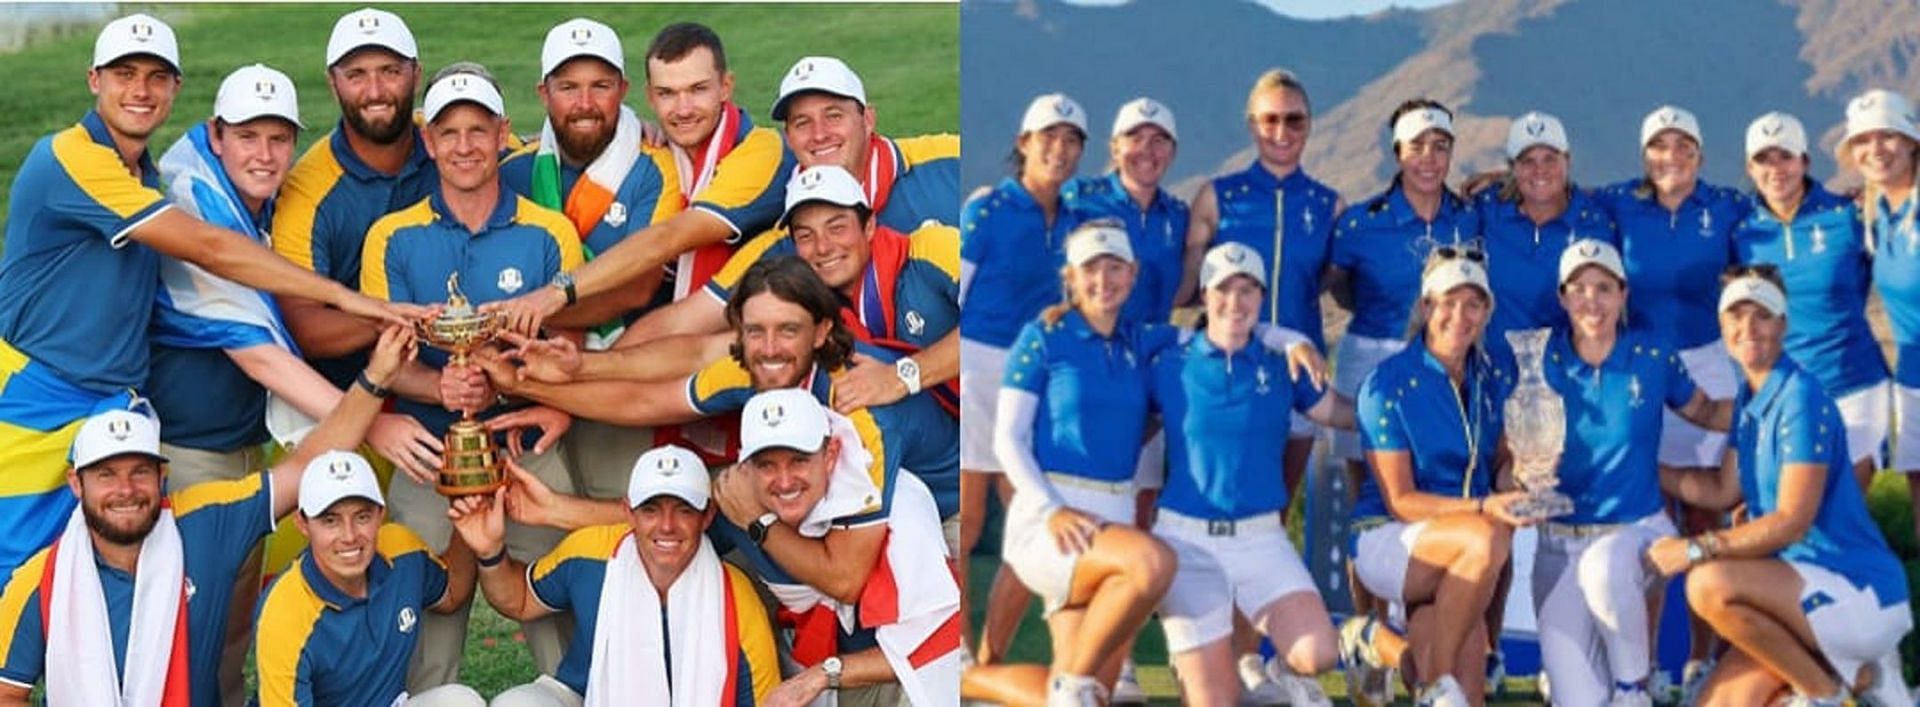 Solheim Cup and Ryder Cup champions